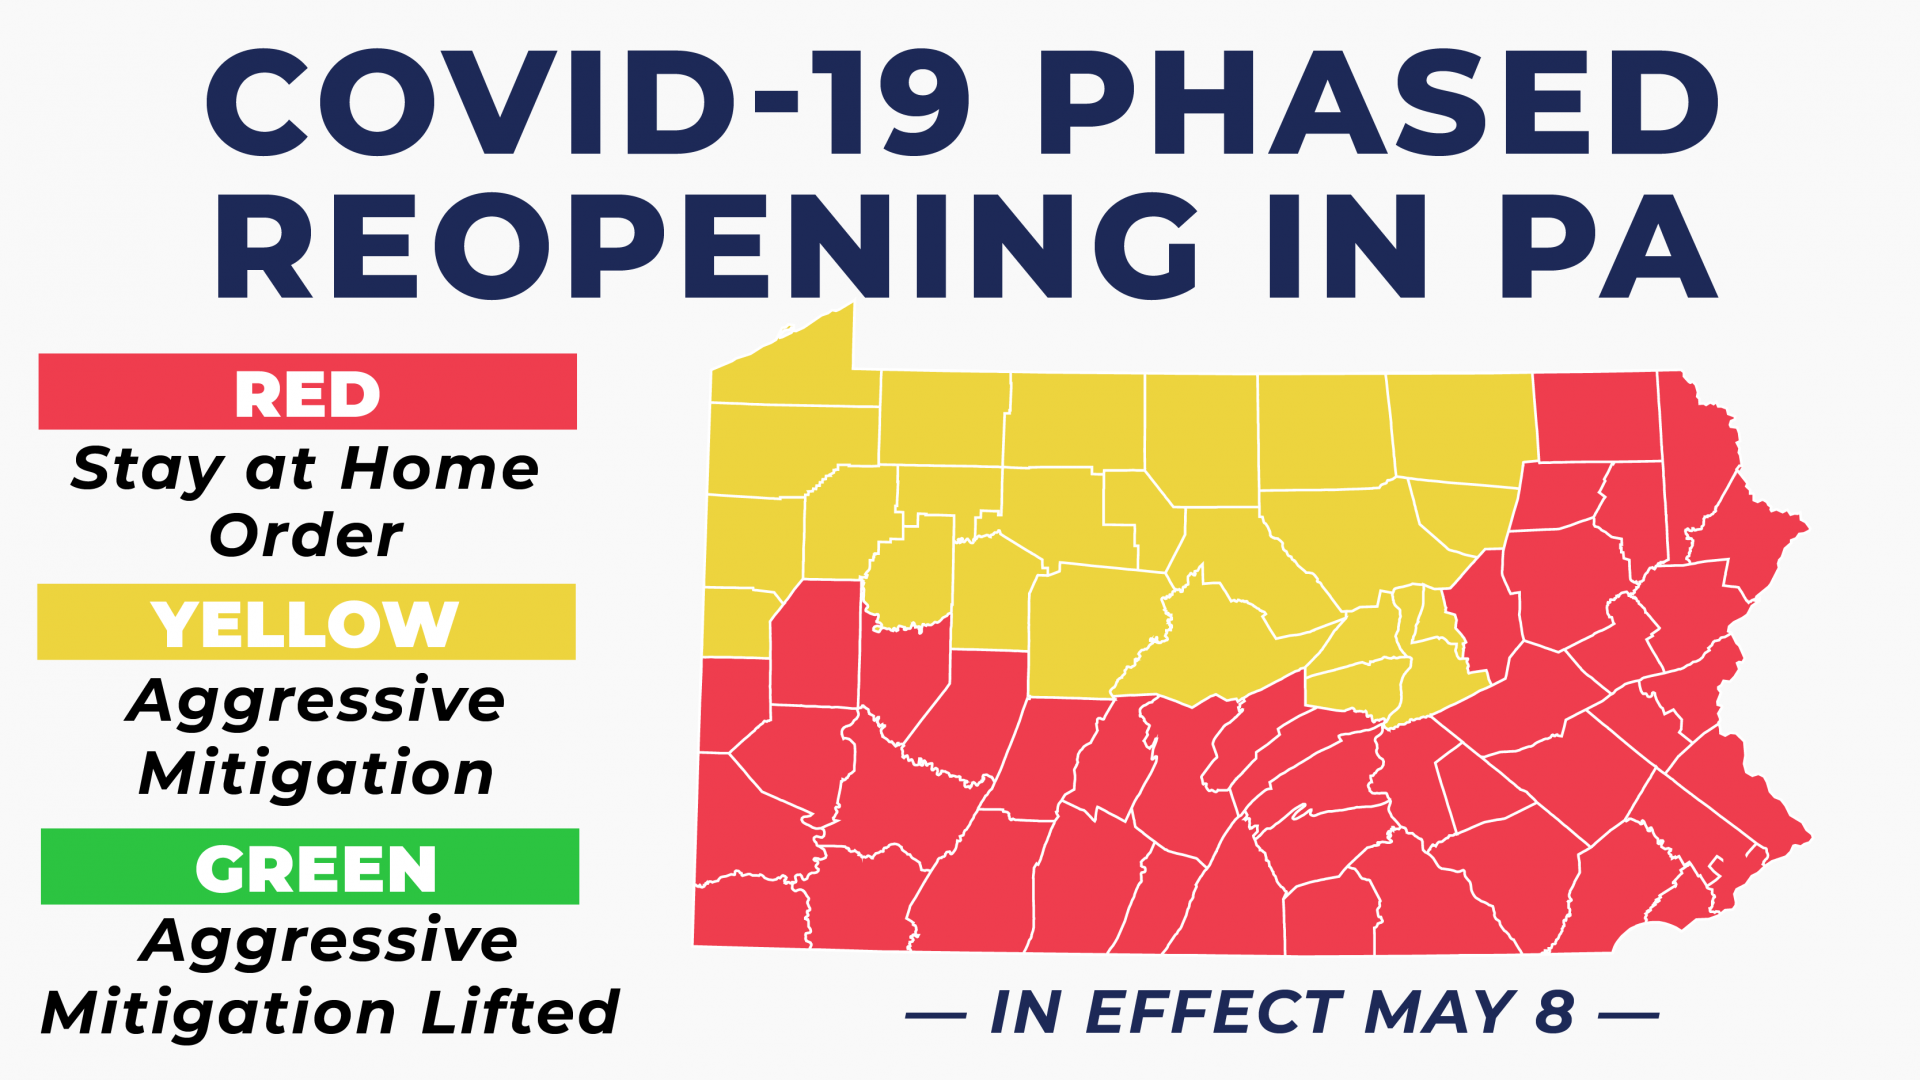 On May 8, 24 counties will begin to reopen.